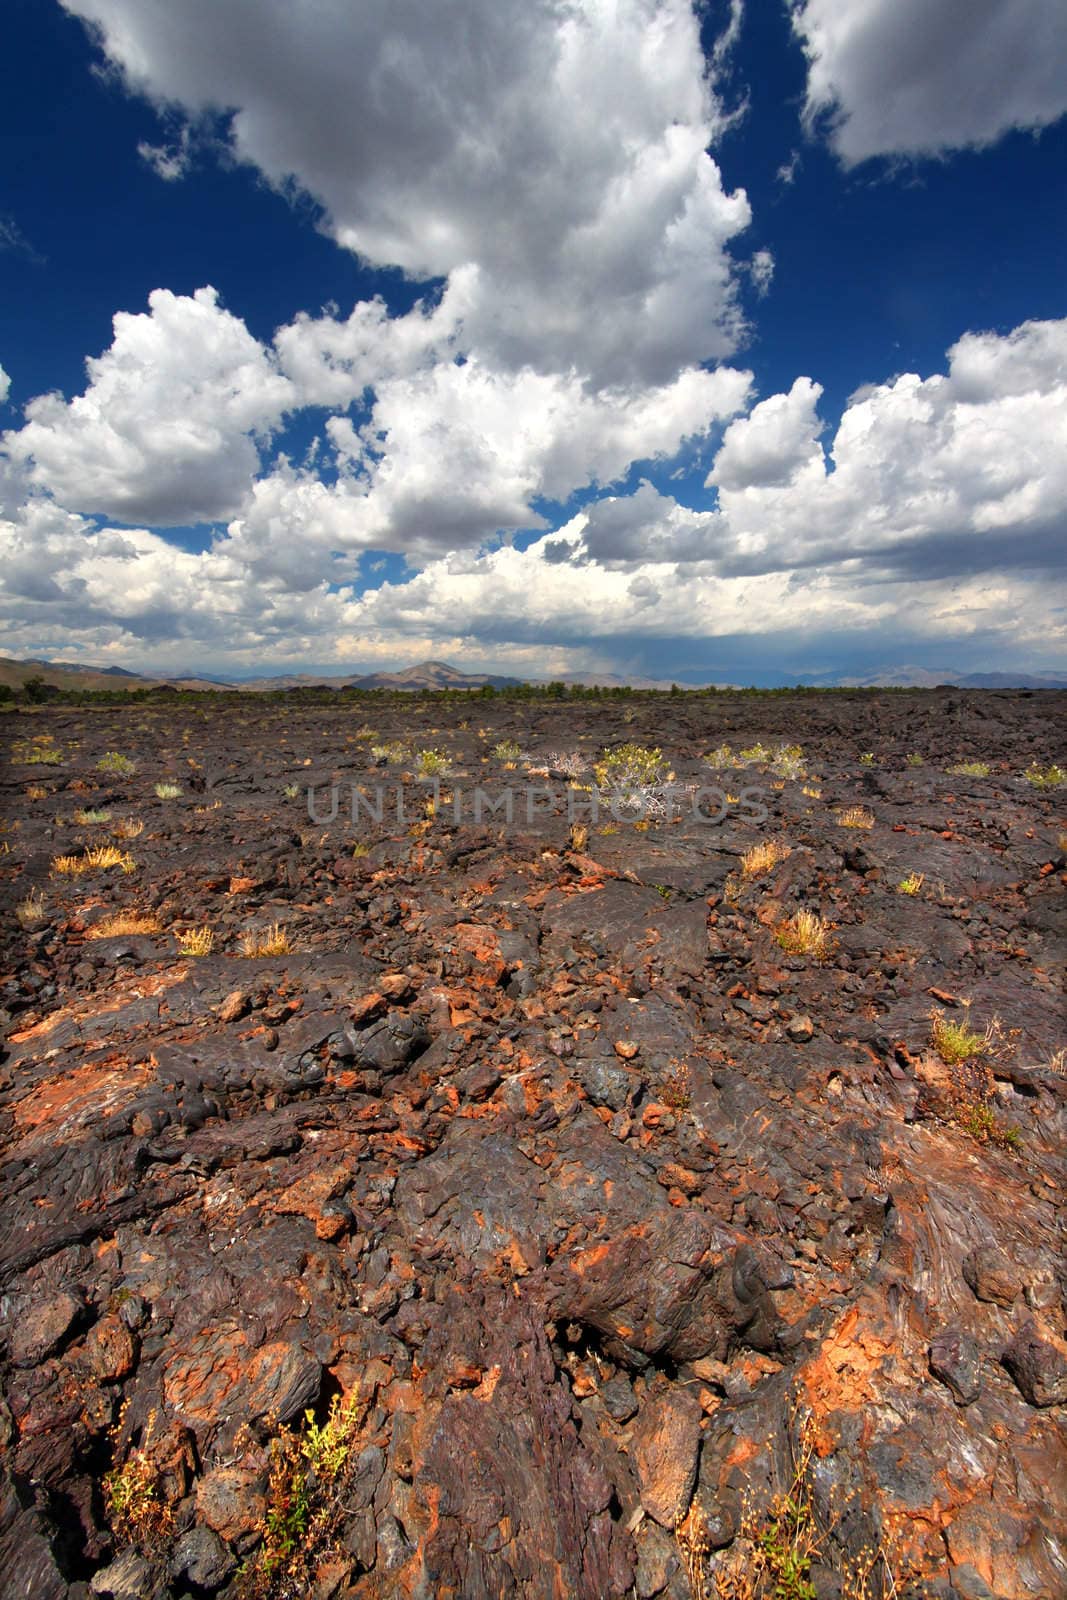 Jagged volcanic rock stretches far into the landscape at Craters of the Moon National Monument of Idaho.